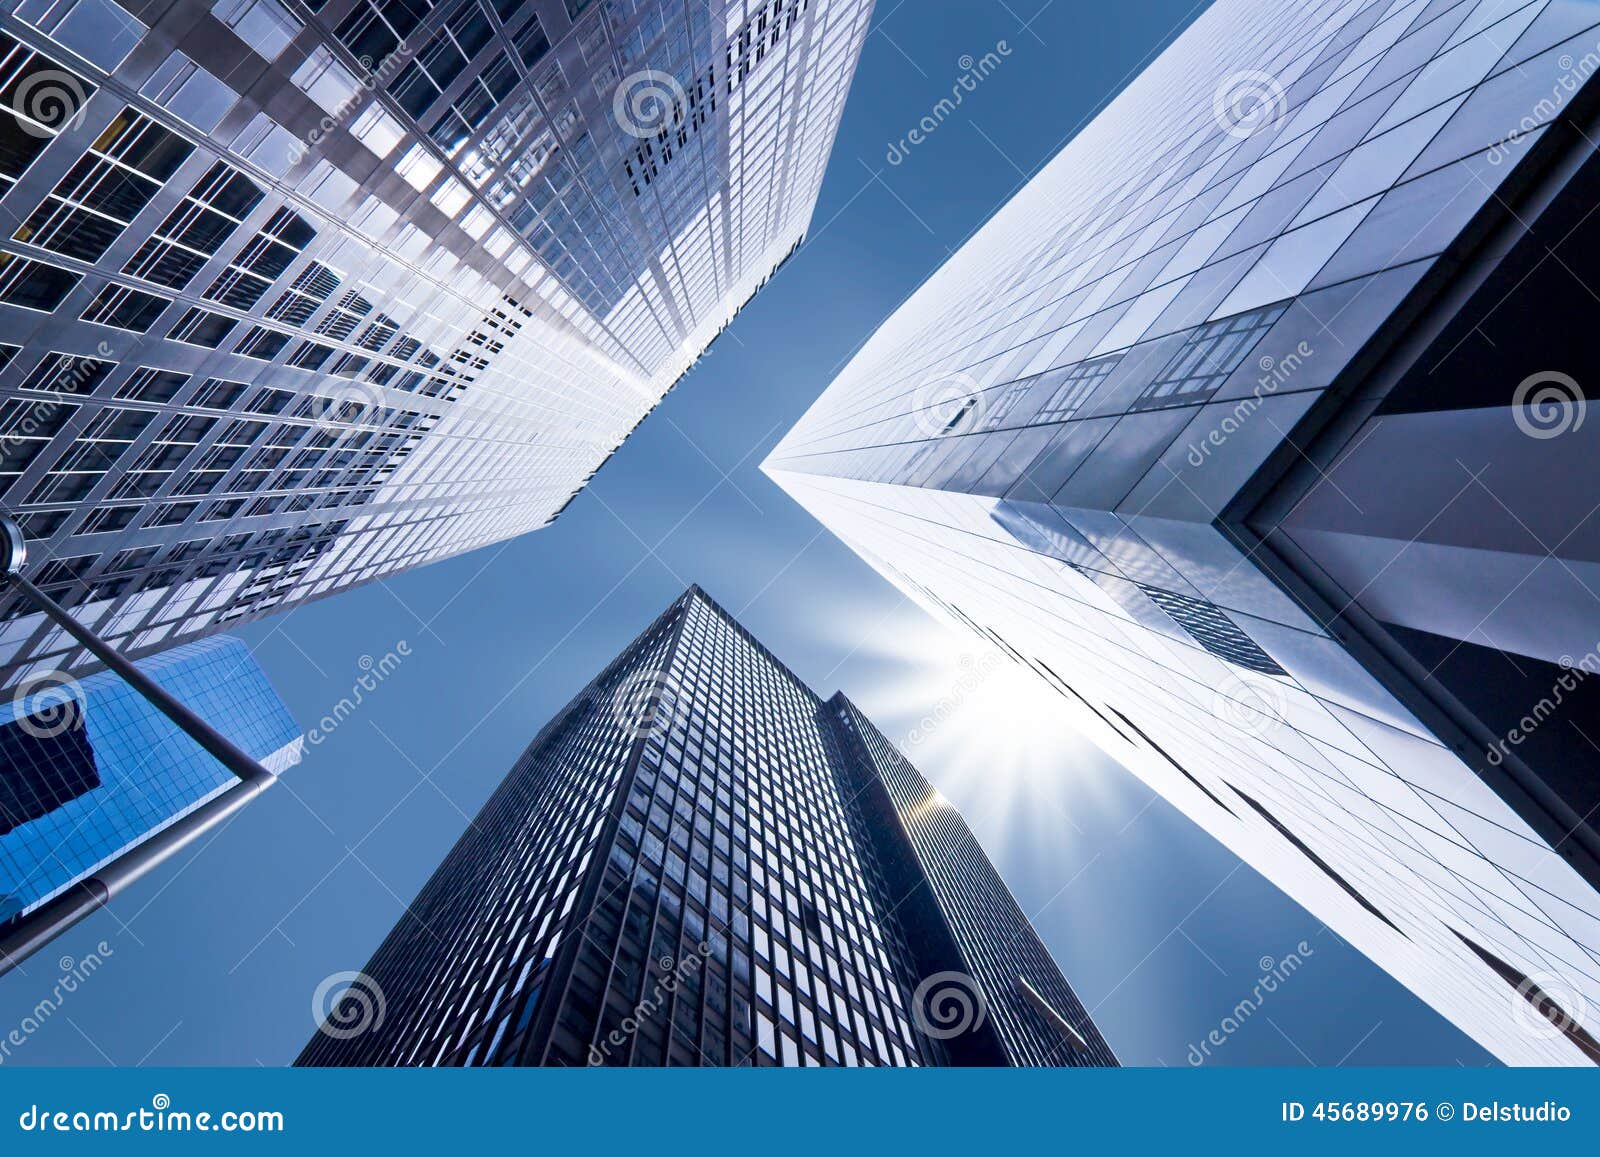 looking up at business buildings